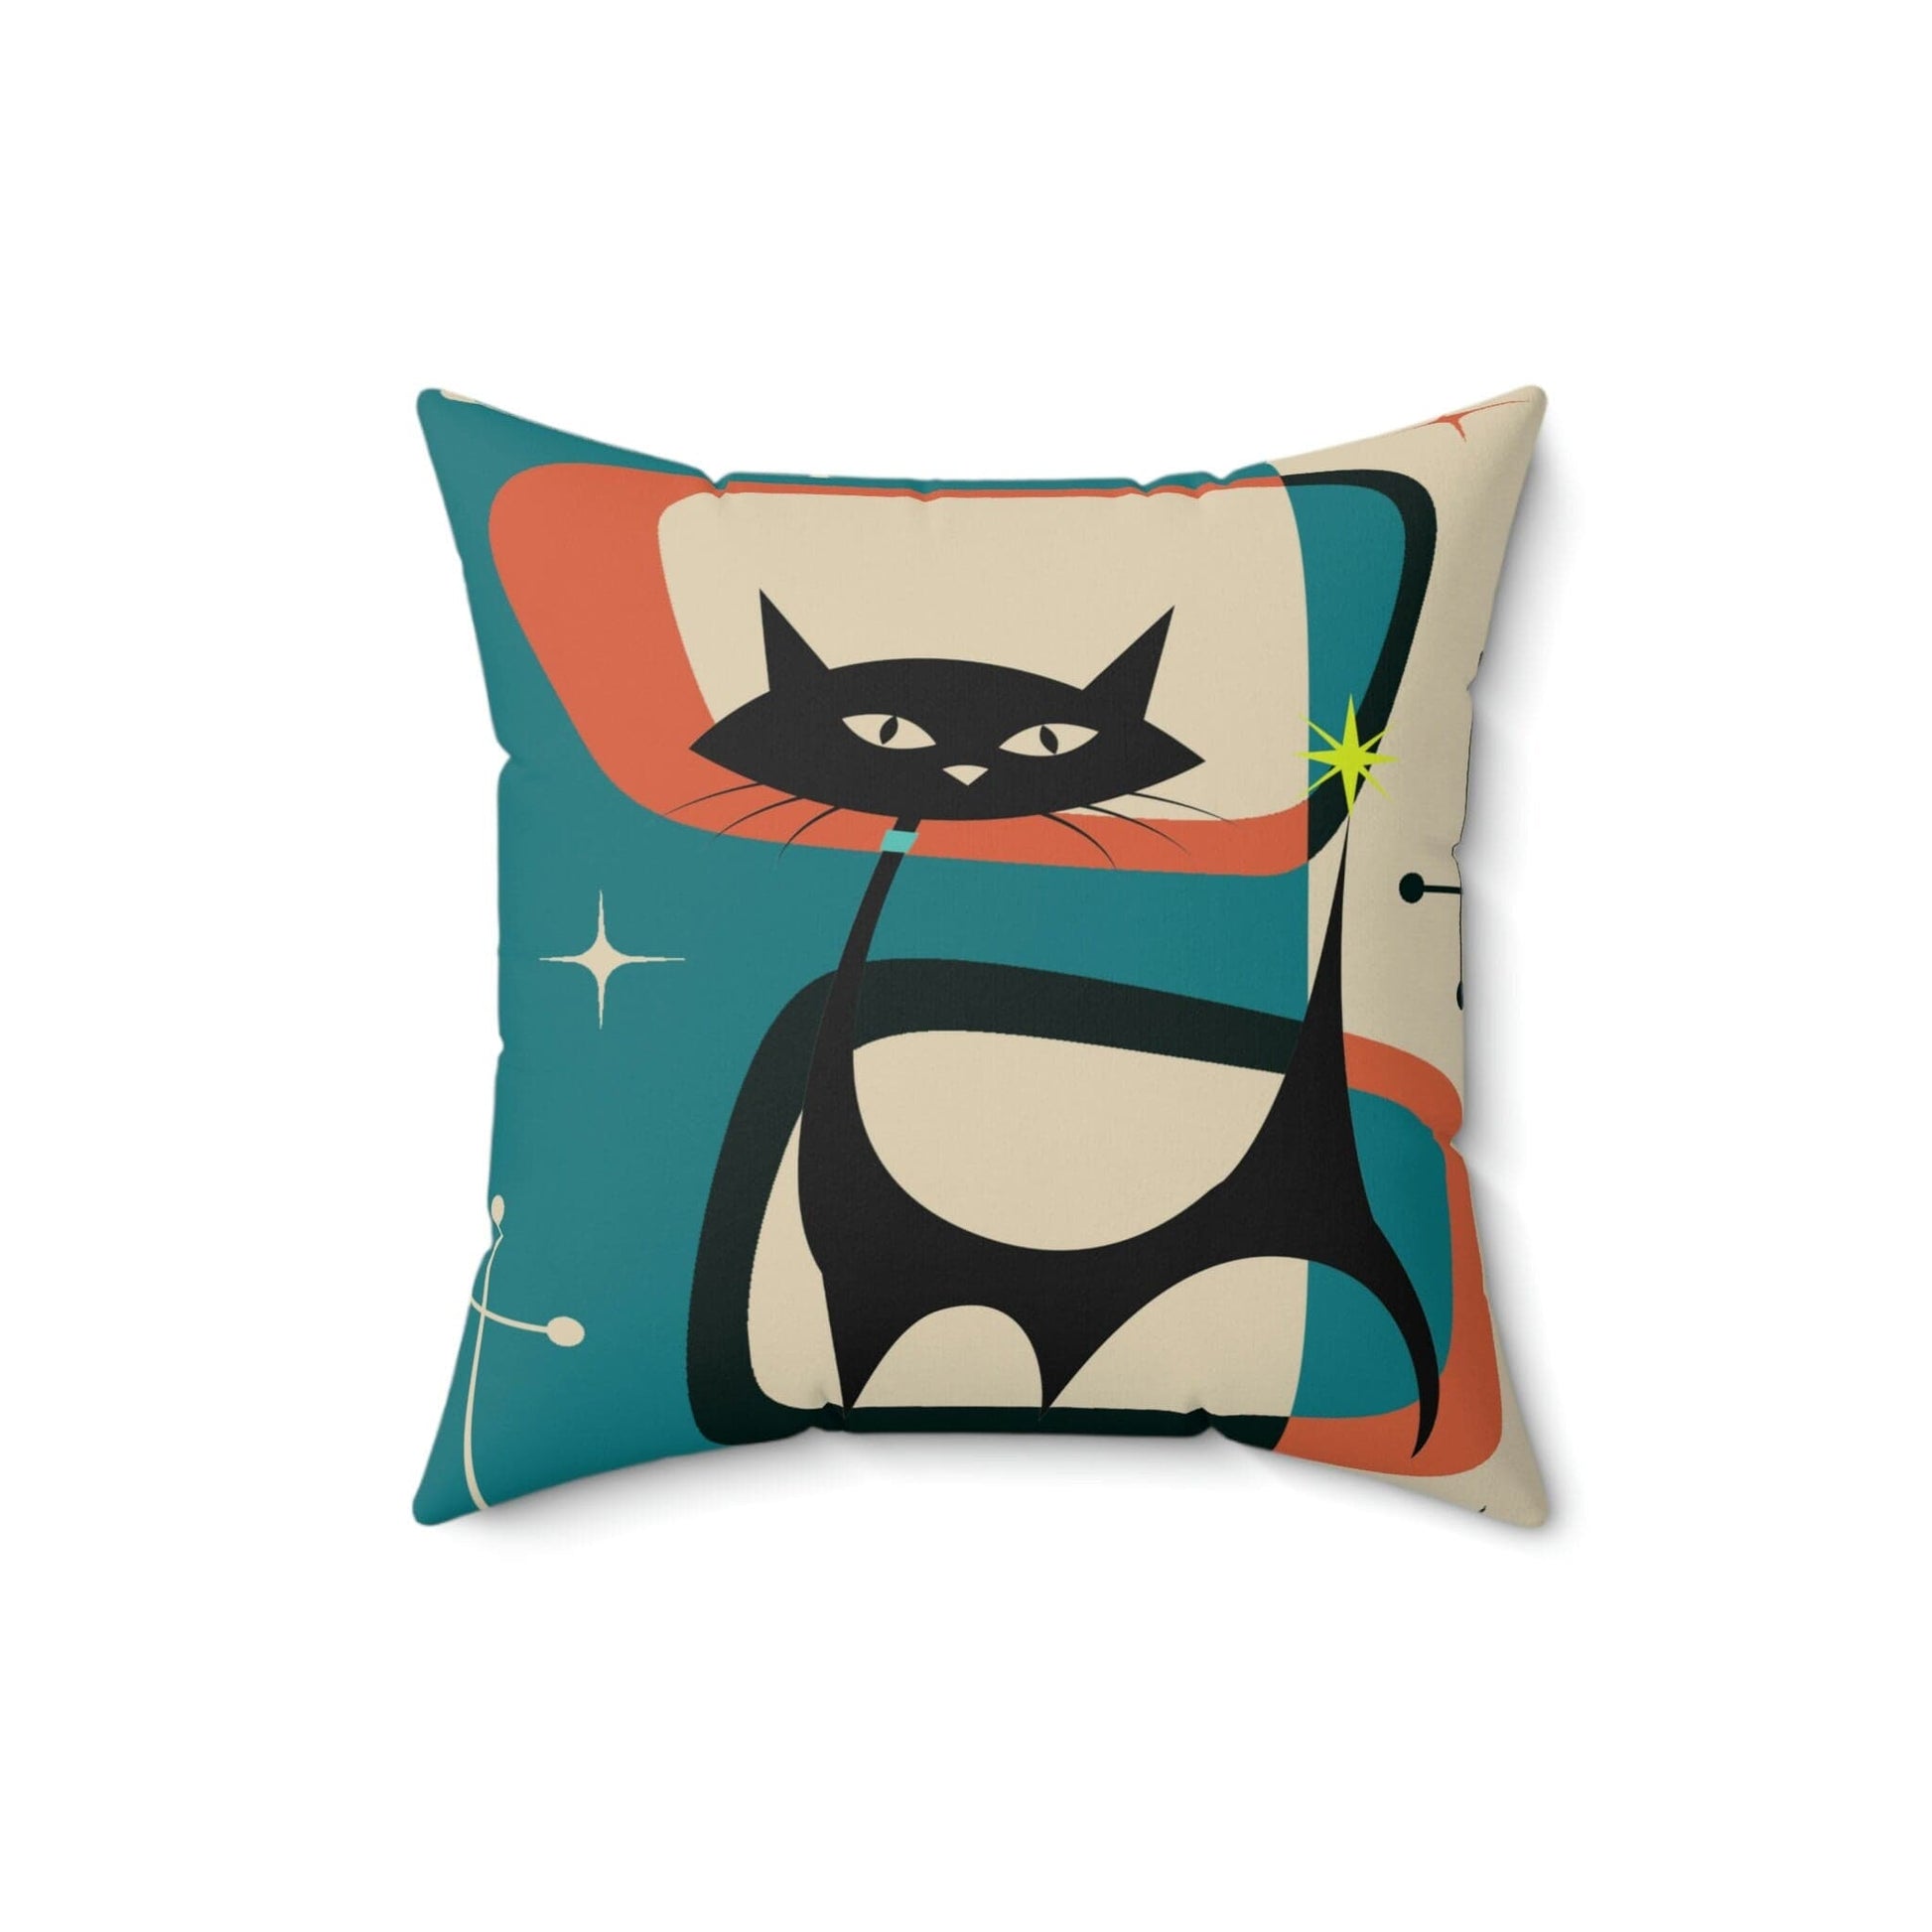 Kate McEnroe New York Retro Atomic Black Cat Throw Pillow Cover, Teal Blue, Cream, Burnt Orange Mid Century Modern Accent Cushion Cover, MCM Square Pillow Case Throw Pillow Covers